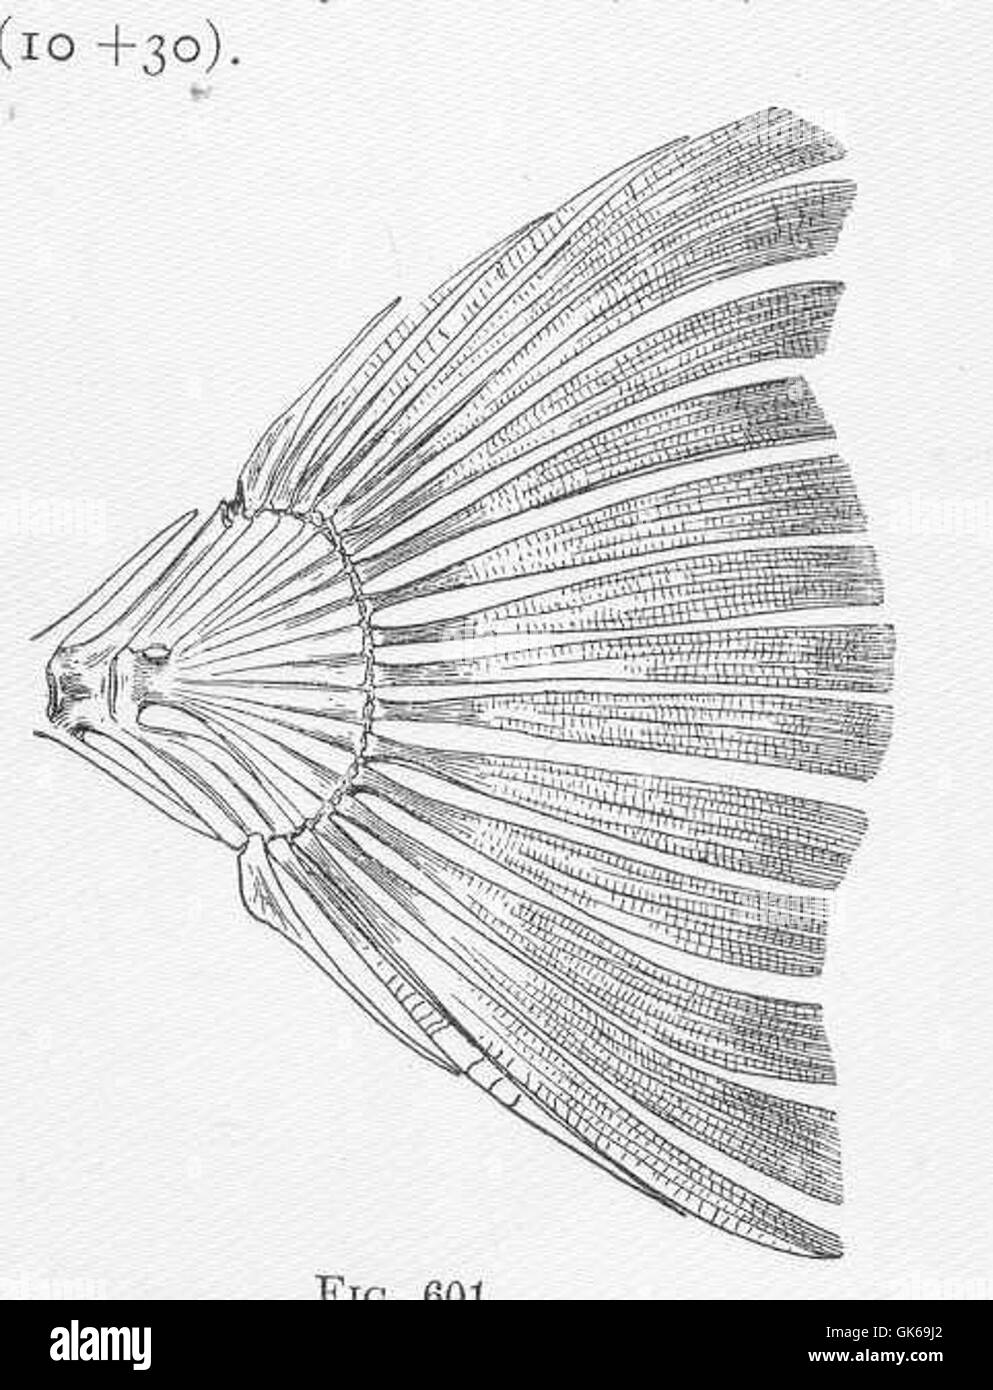 52170 Homocercal tail of a Flounder, Paralichthys californicus Stock Photo